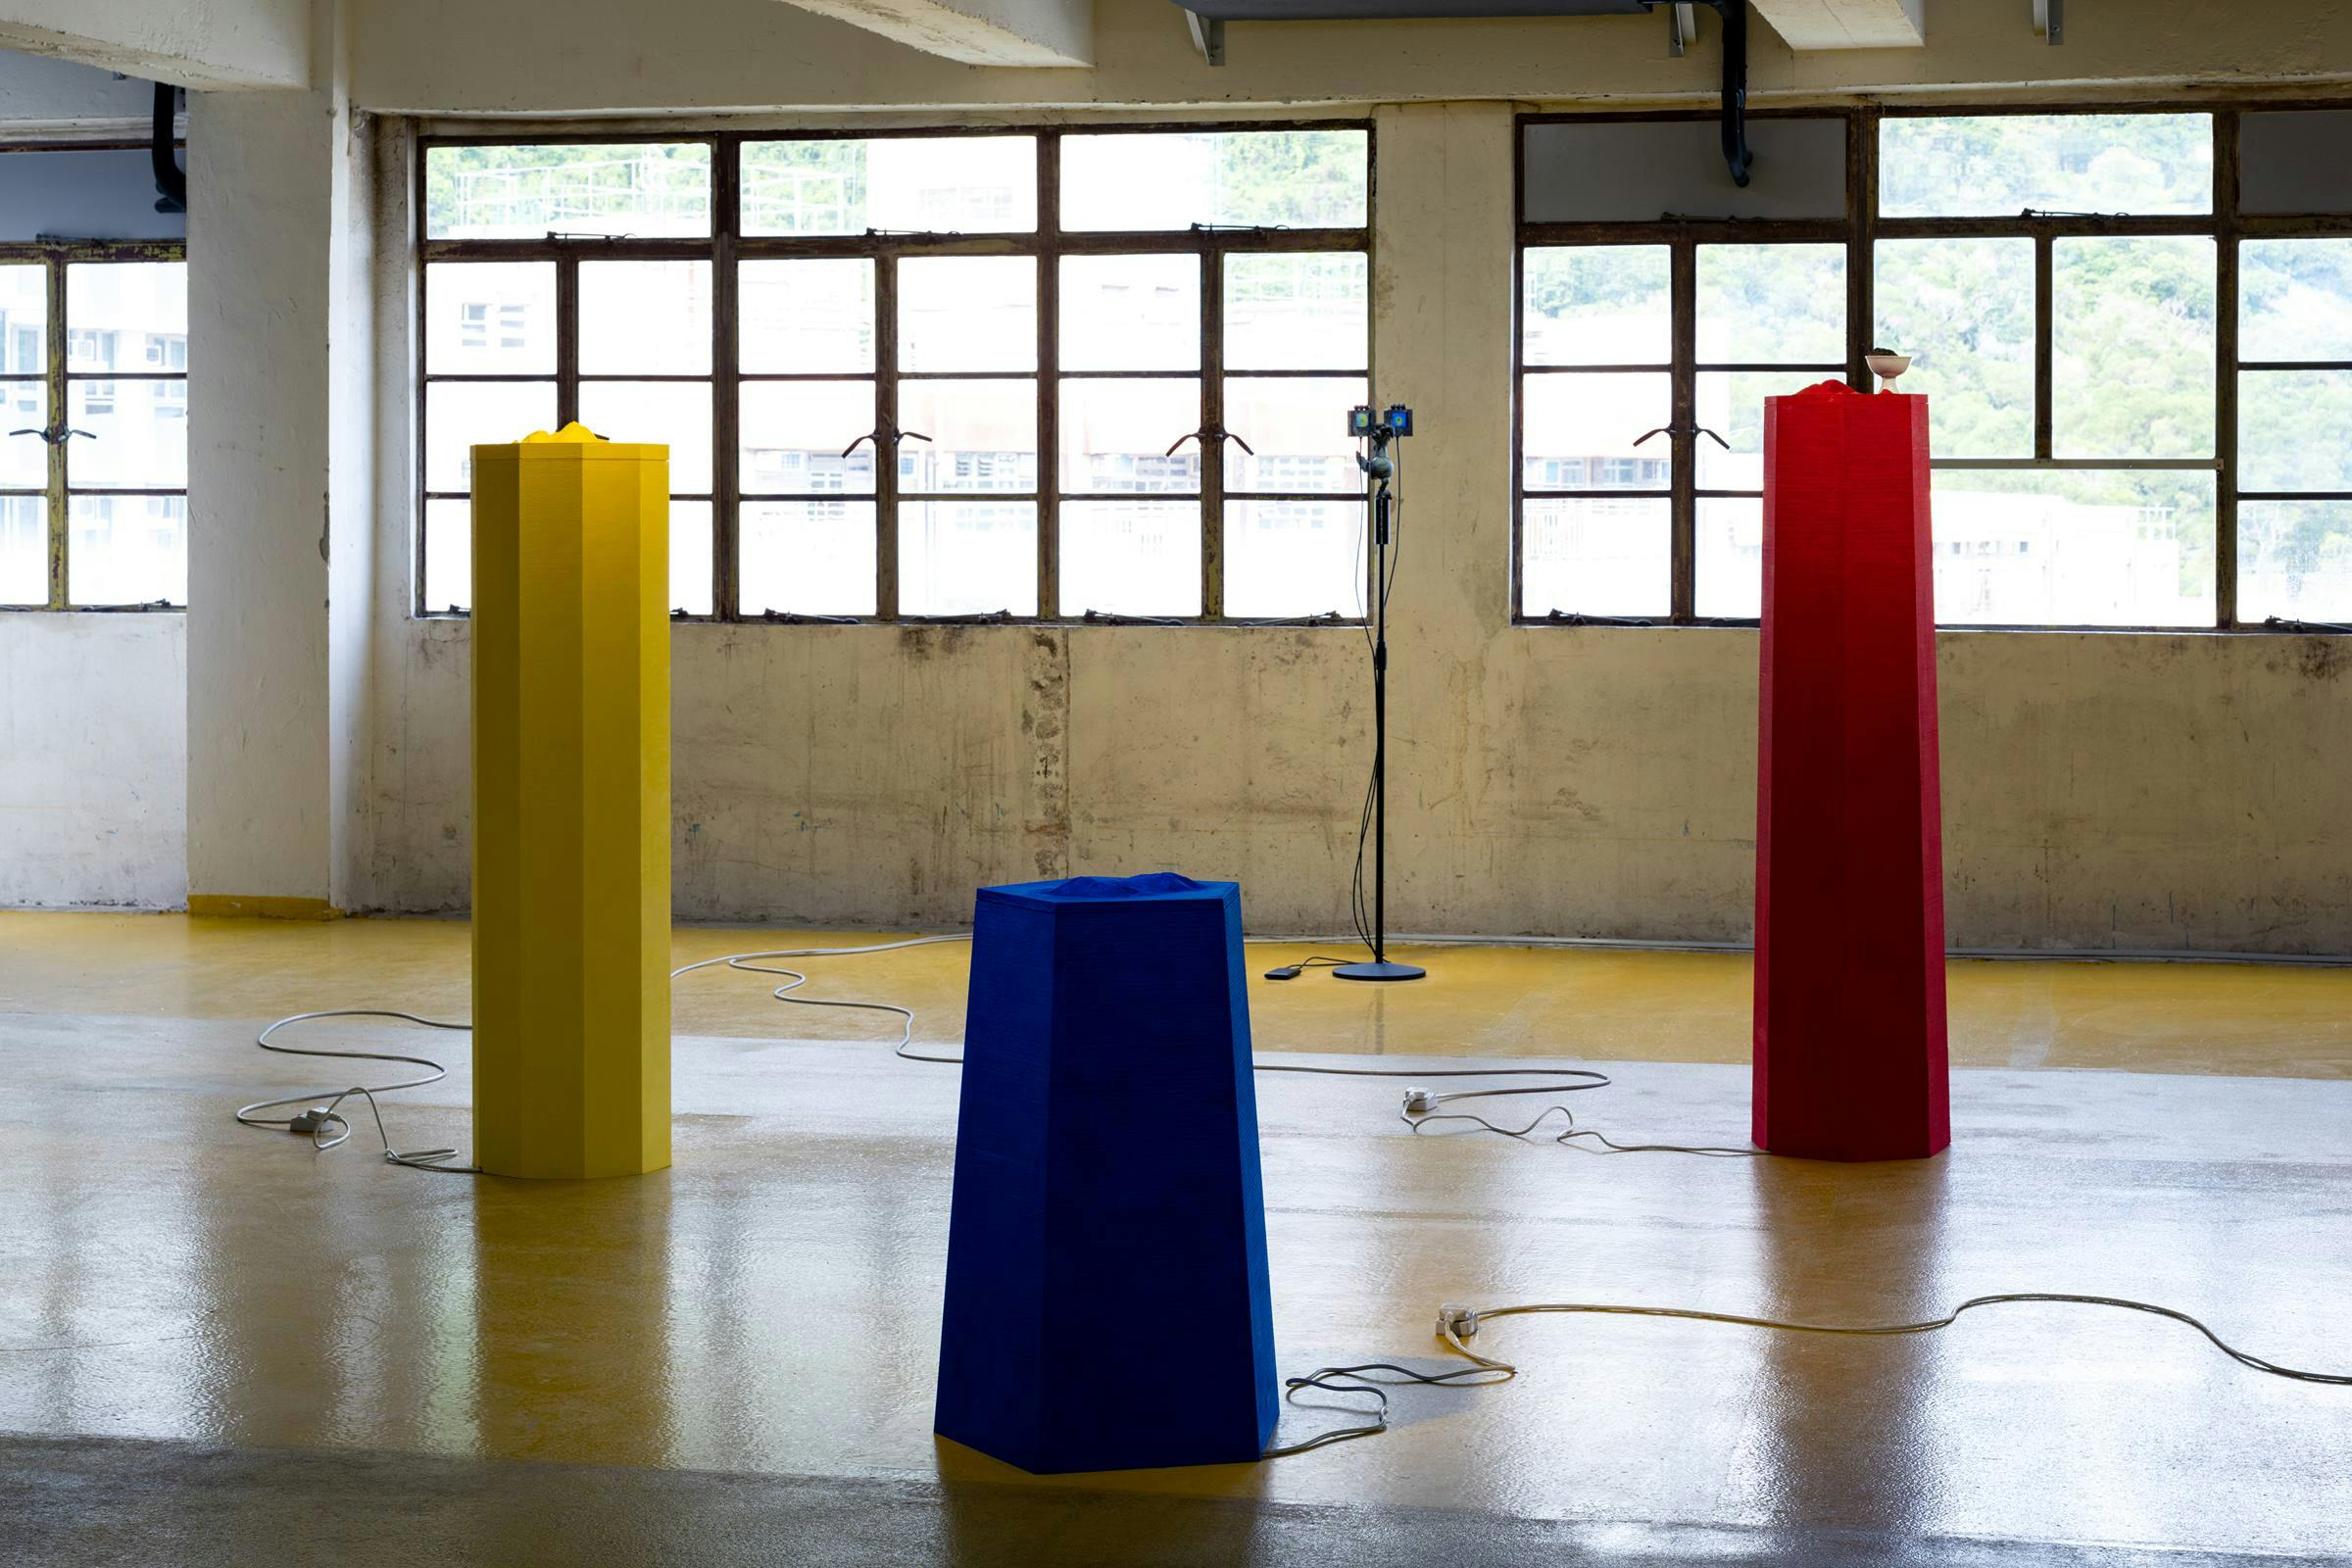 Installation view, Samson Young, The messengers from Music for selective hearing, or assisted living, 24 September - 5 November 2022, Kiang Malingue, Hong Kong. Multiple art works are visible in an industrial space that has a yellow floor